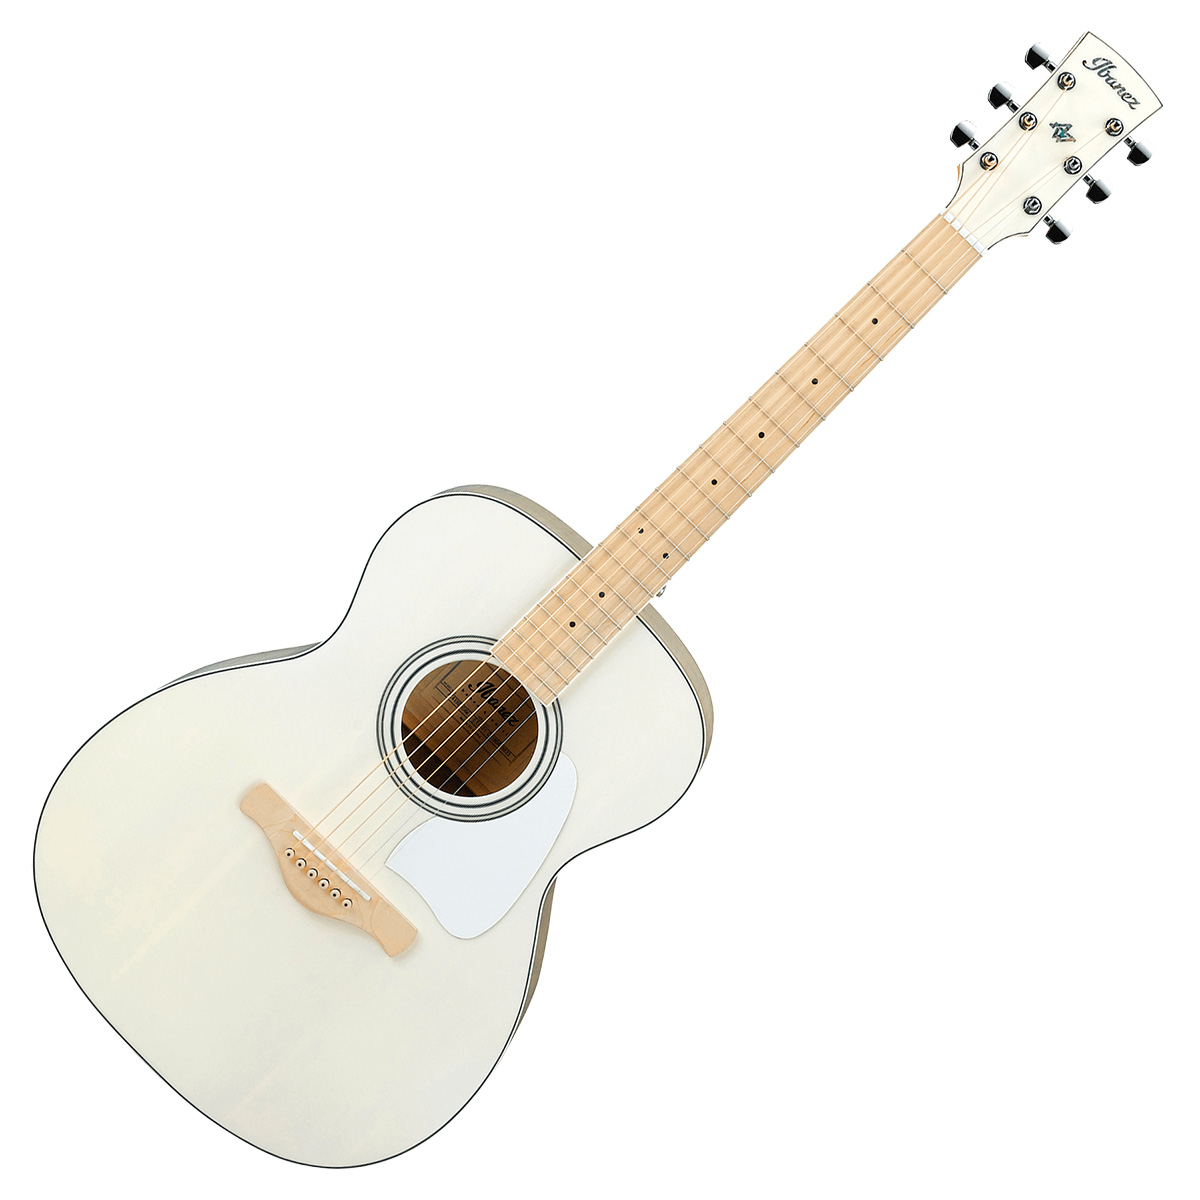 Ibanez AC419E OAW (Open Pore Antique White) エレアコギター ソフト 